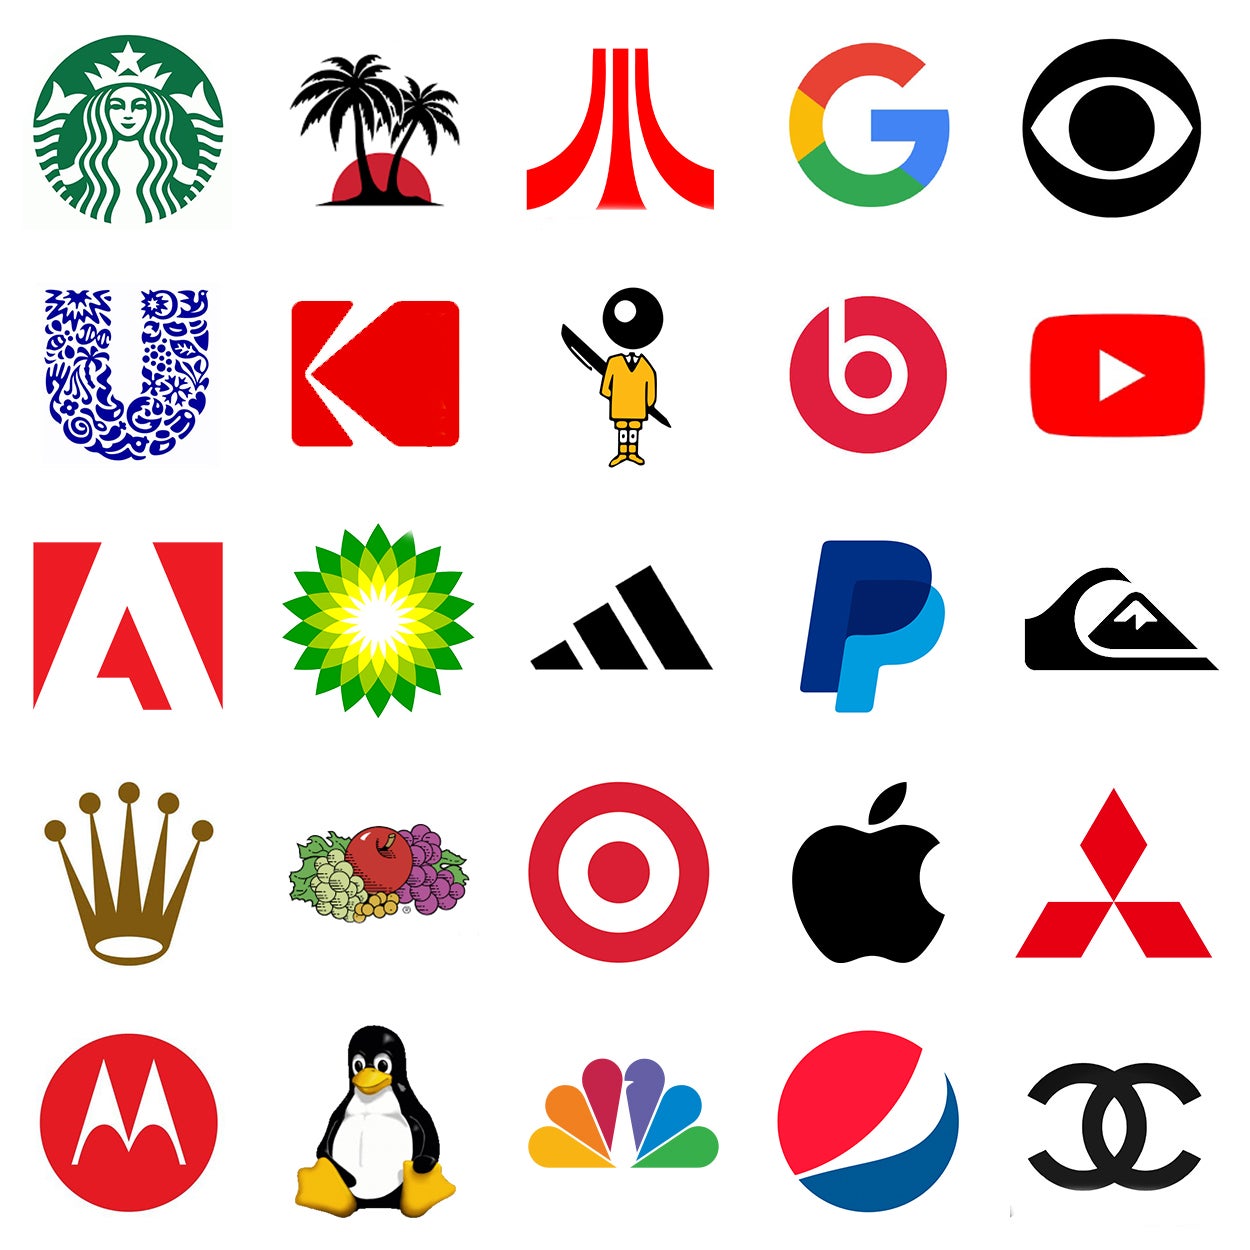 Test your knowledge with the ultimate brands logos quiz